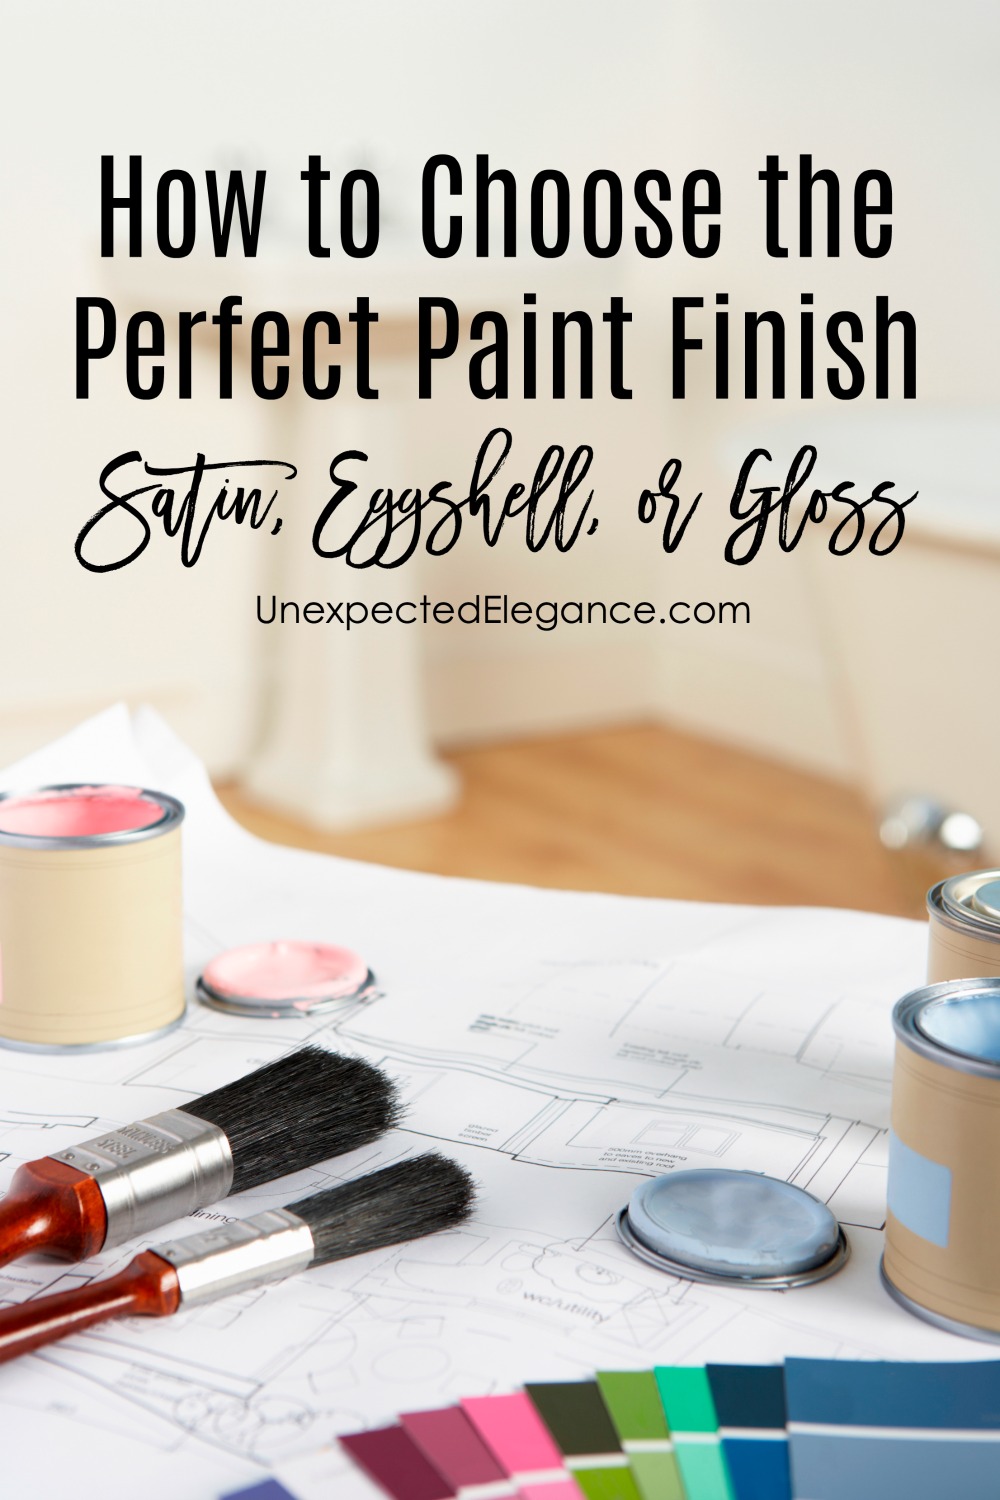 Do you have a room or piece of furniture you need to paint, but keep putting it off because you aren't sure which finish to use? See How to choose the perfect paint finish HERE!